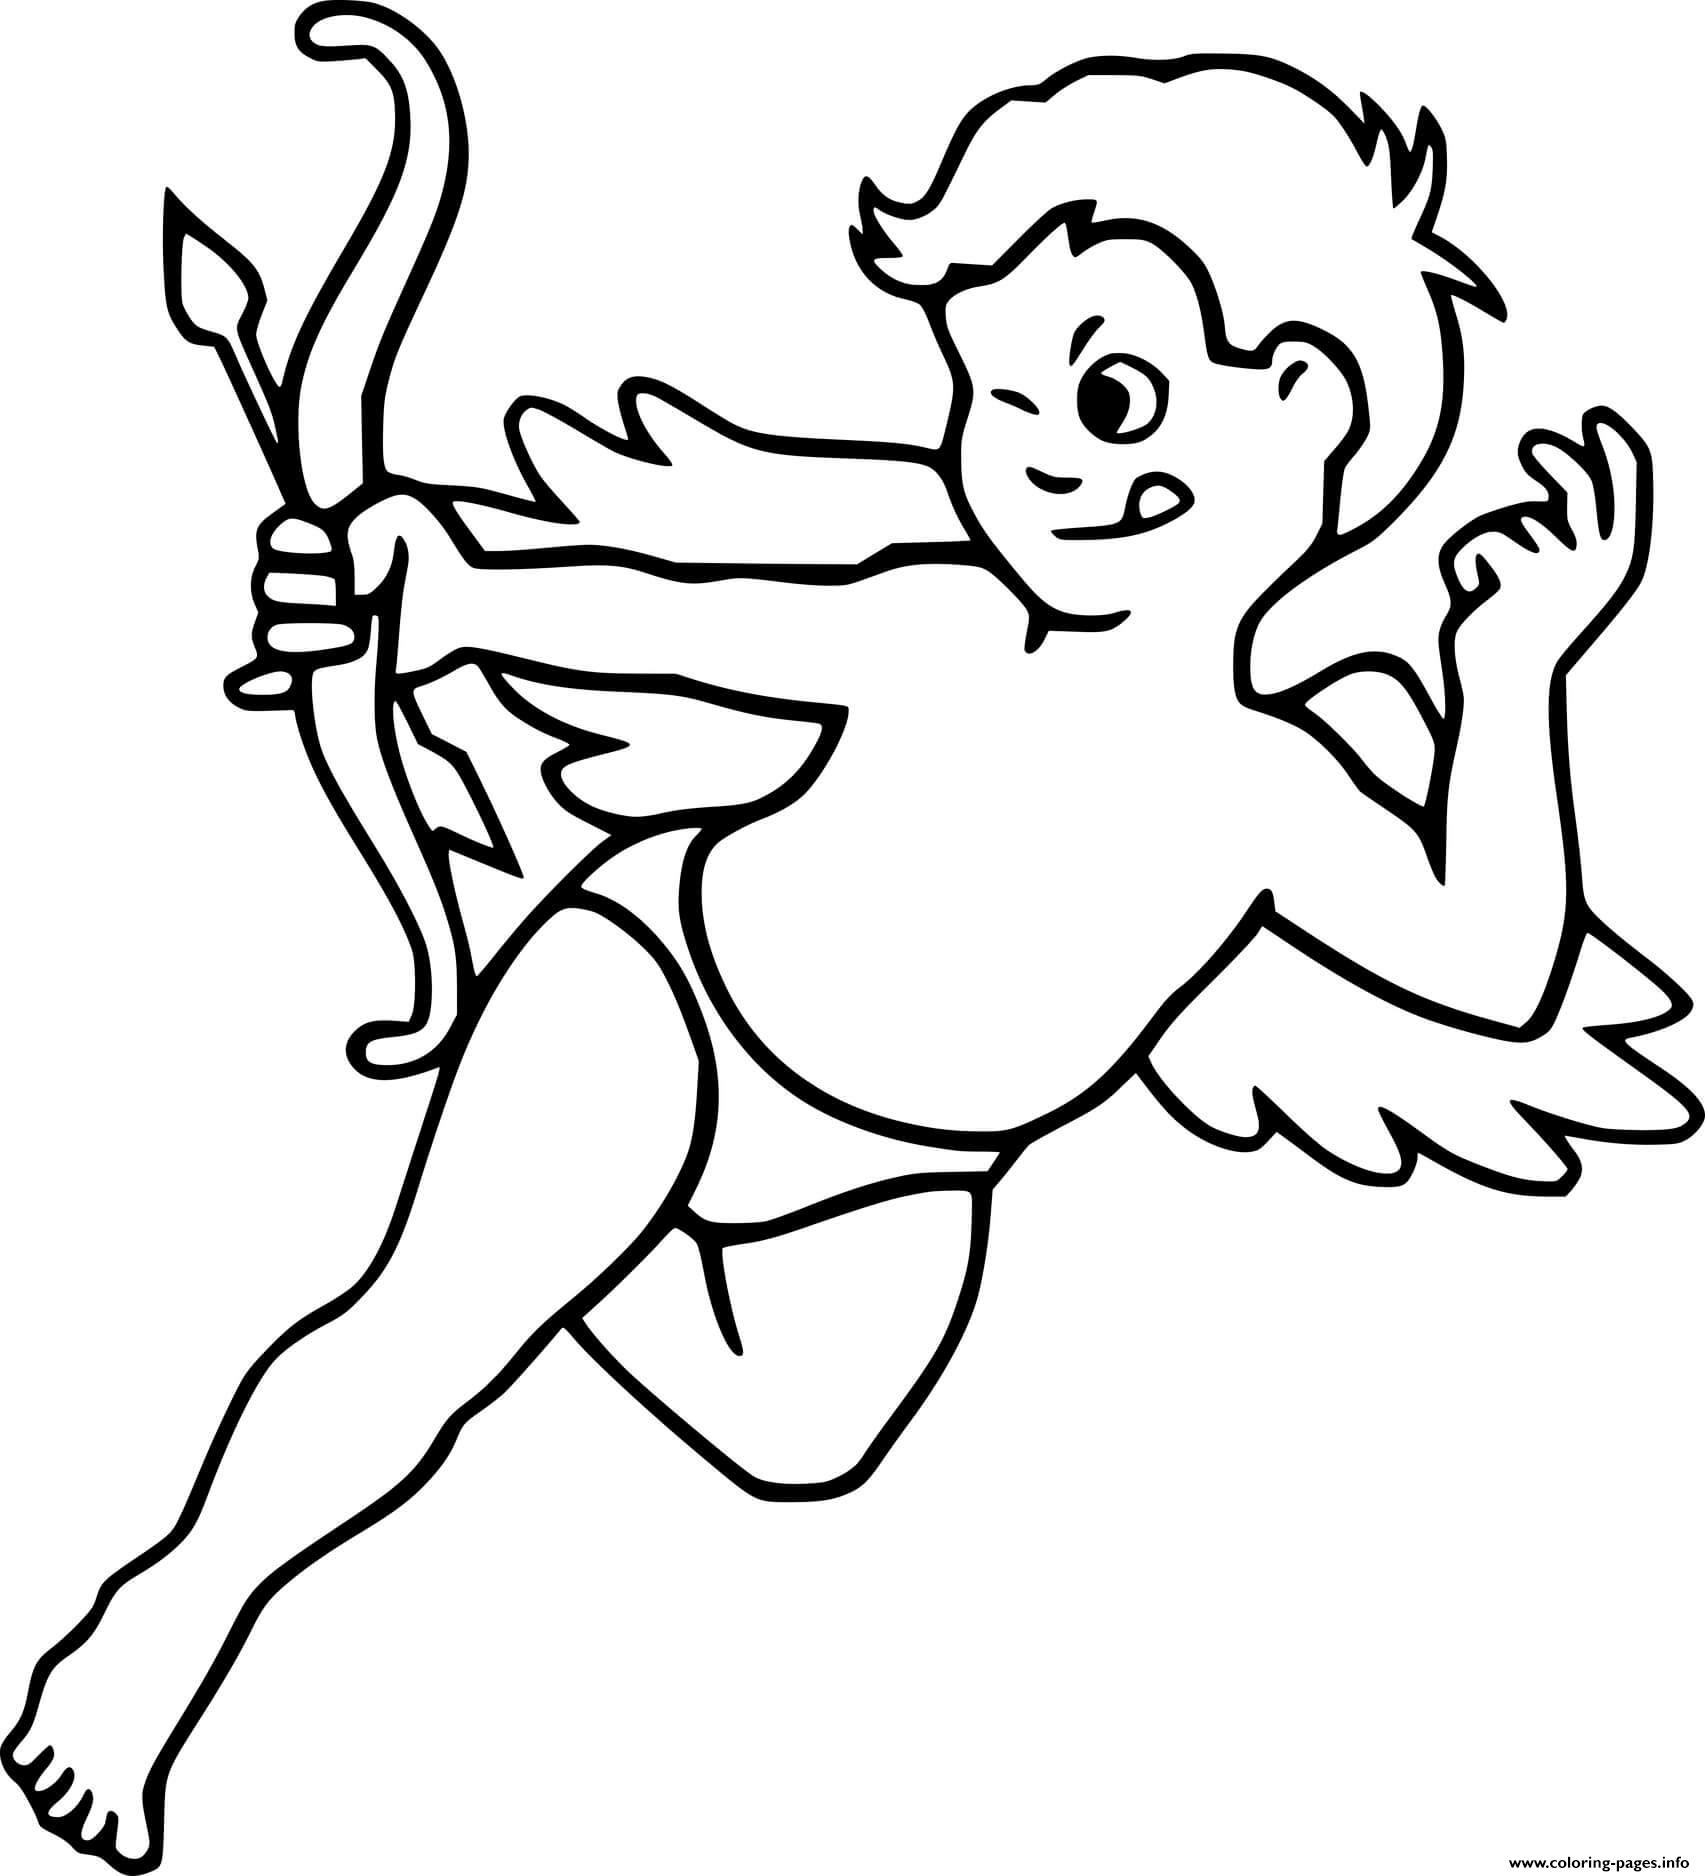 Naughty Cupid coloring